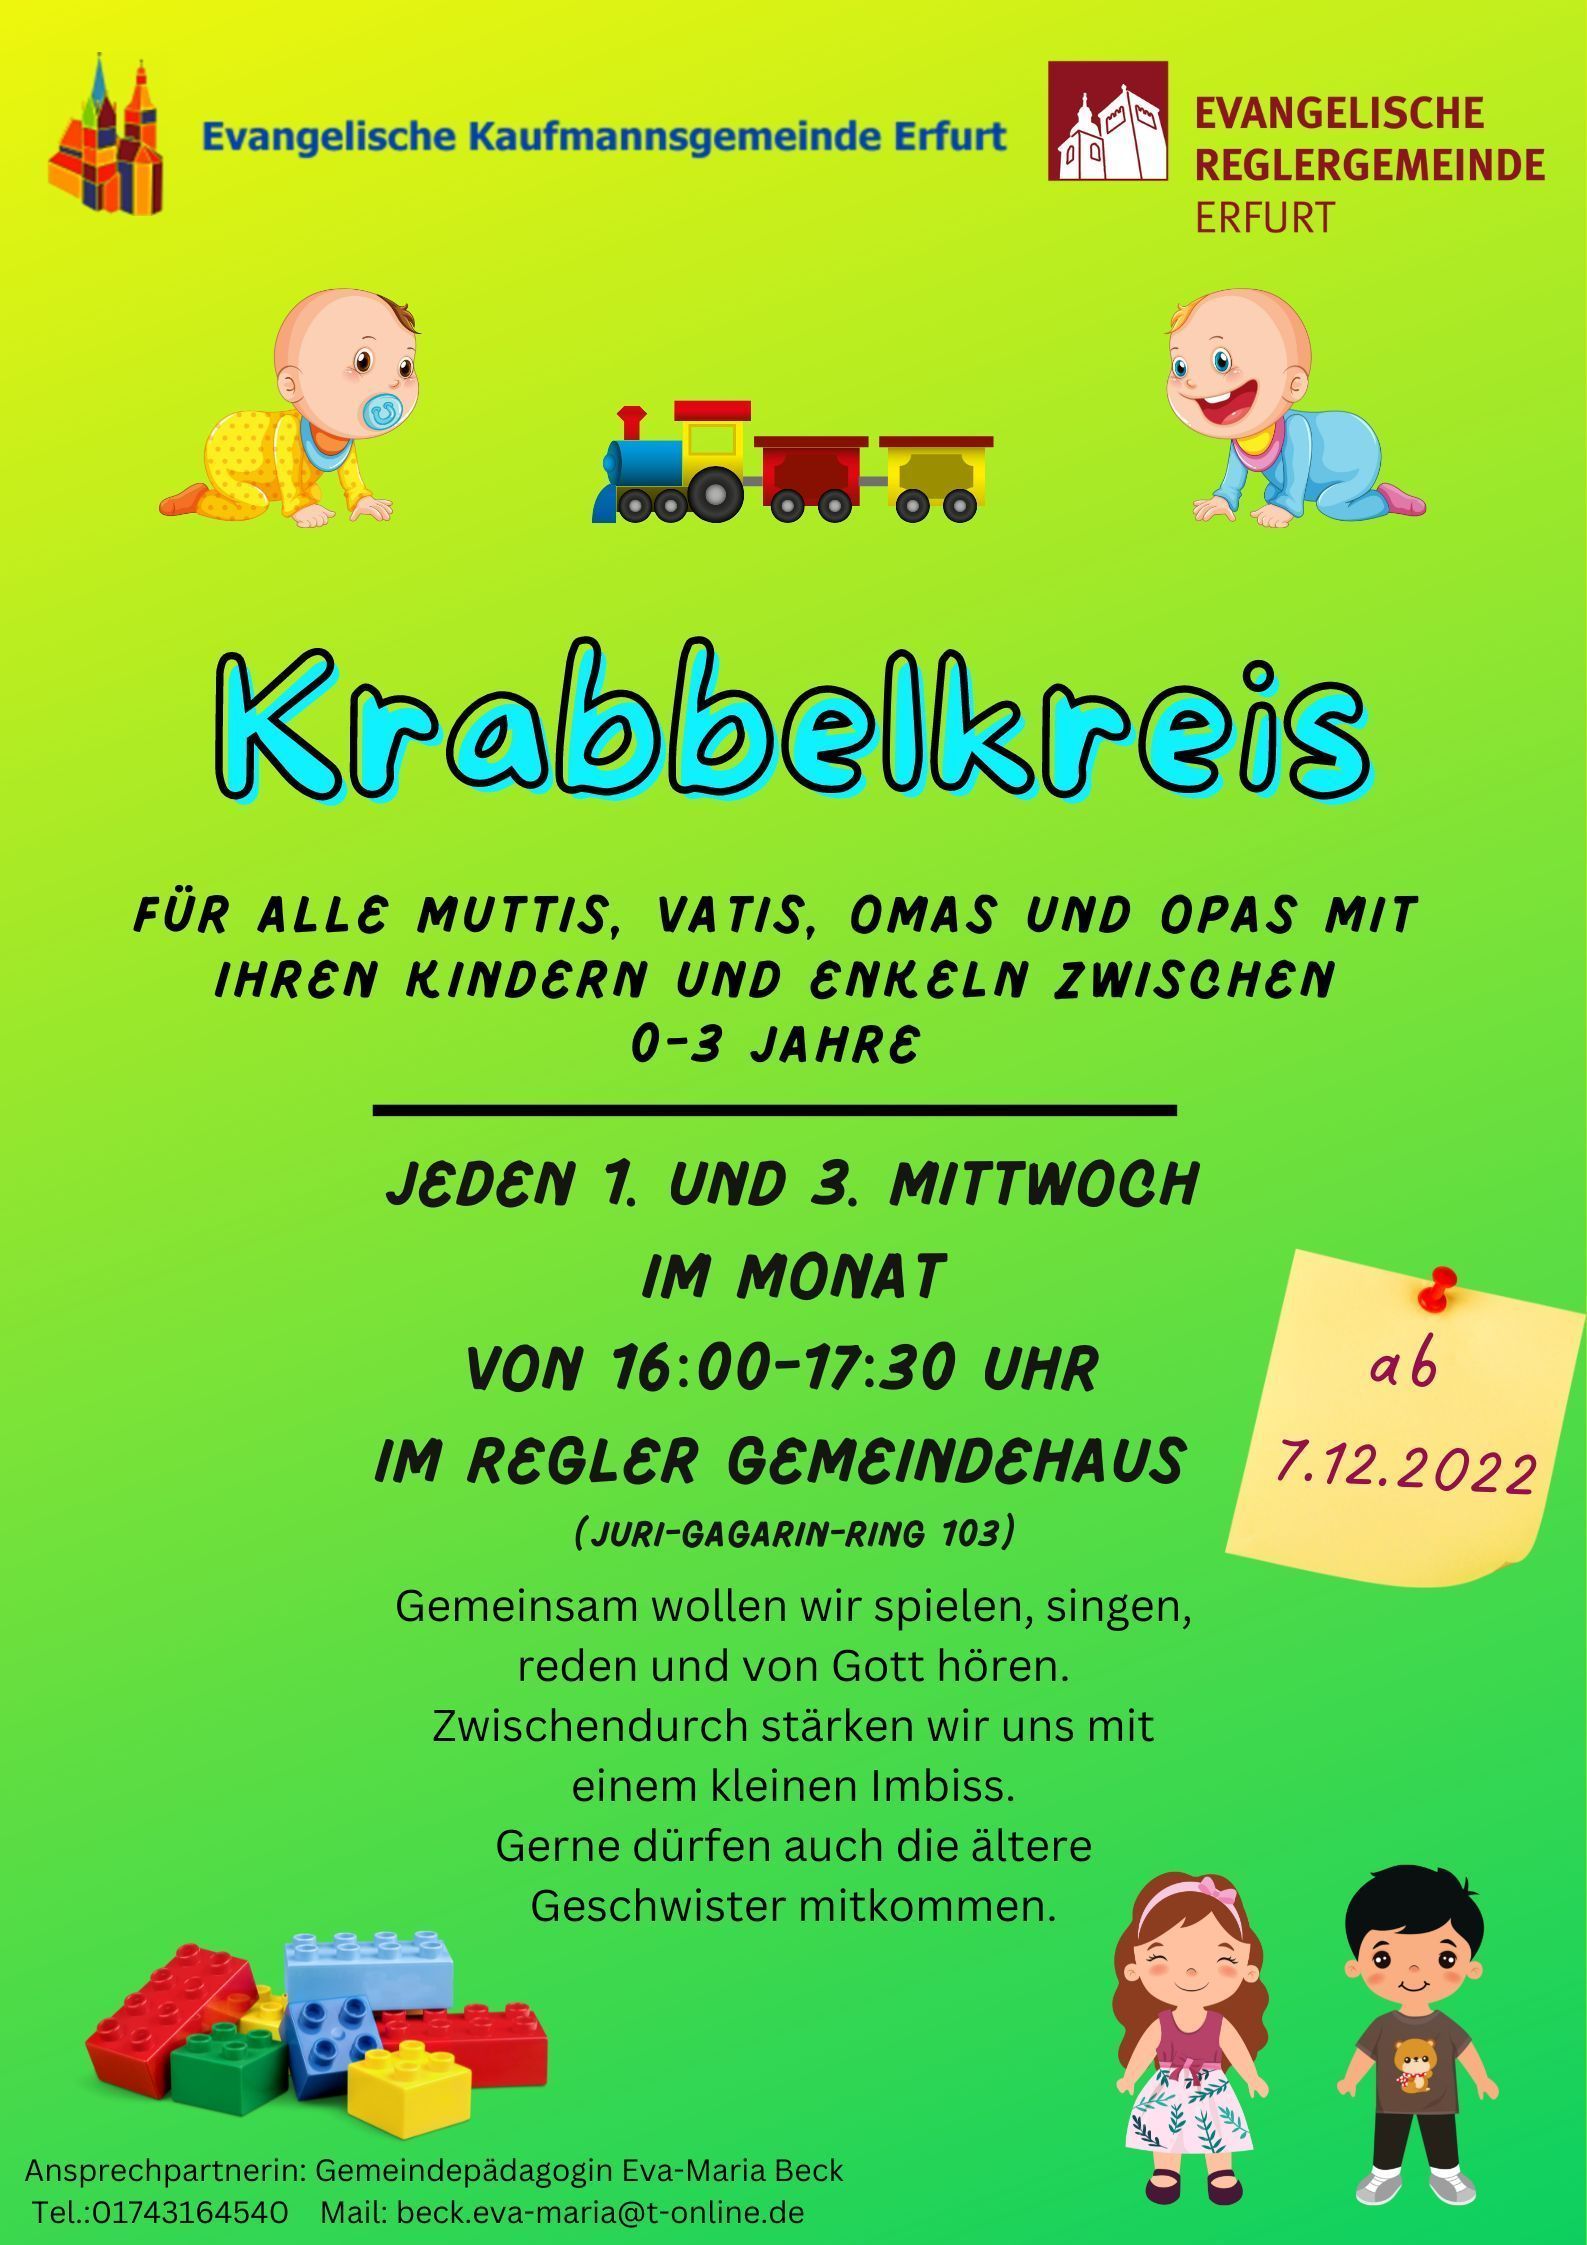 You are currently viewing Krabbelkreis ab 7. 12. 2022